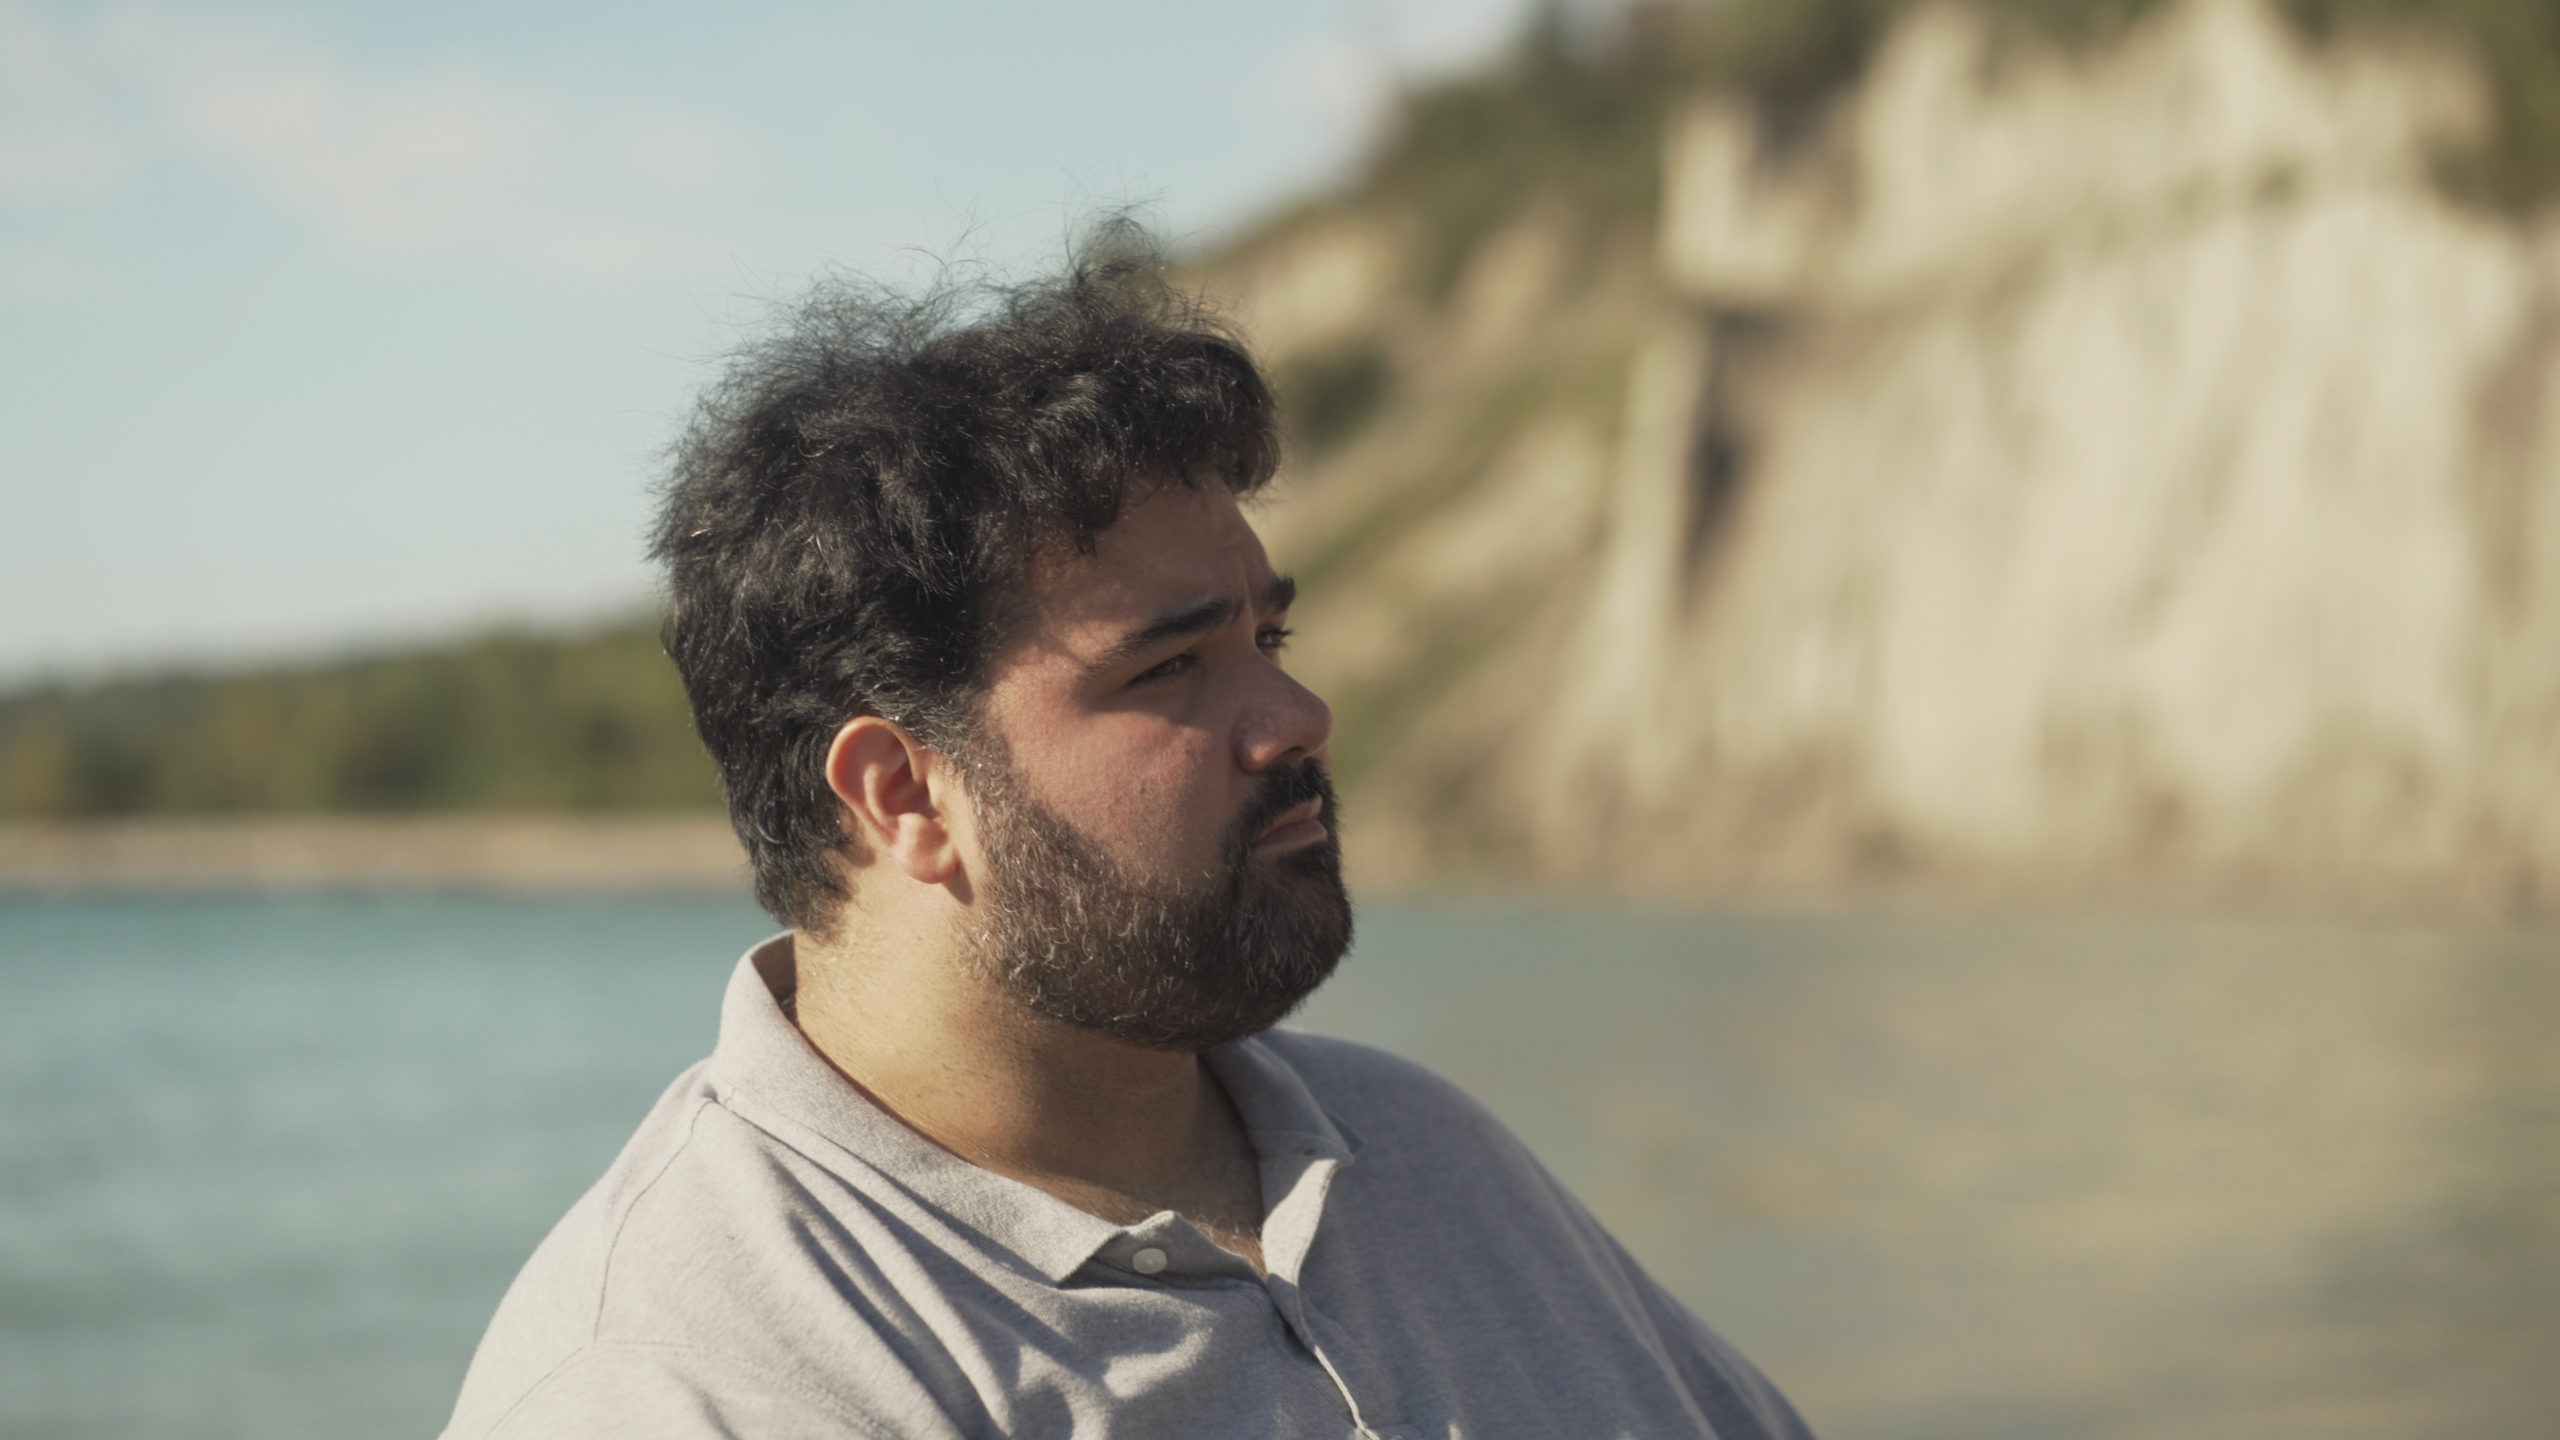 Image of Requiem Soloist Andrew Haji, who has black hair, a beard, and is wearing a white polo, staring off to the right with the Scarborough Bluffs and Lake Ontario in the background.